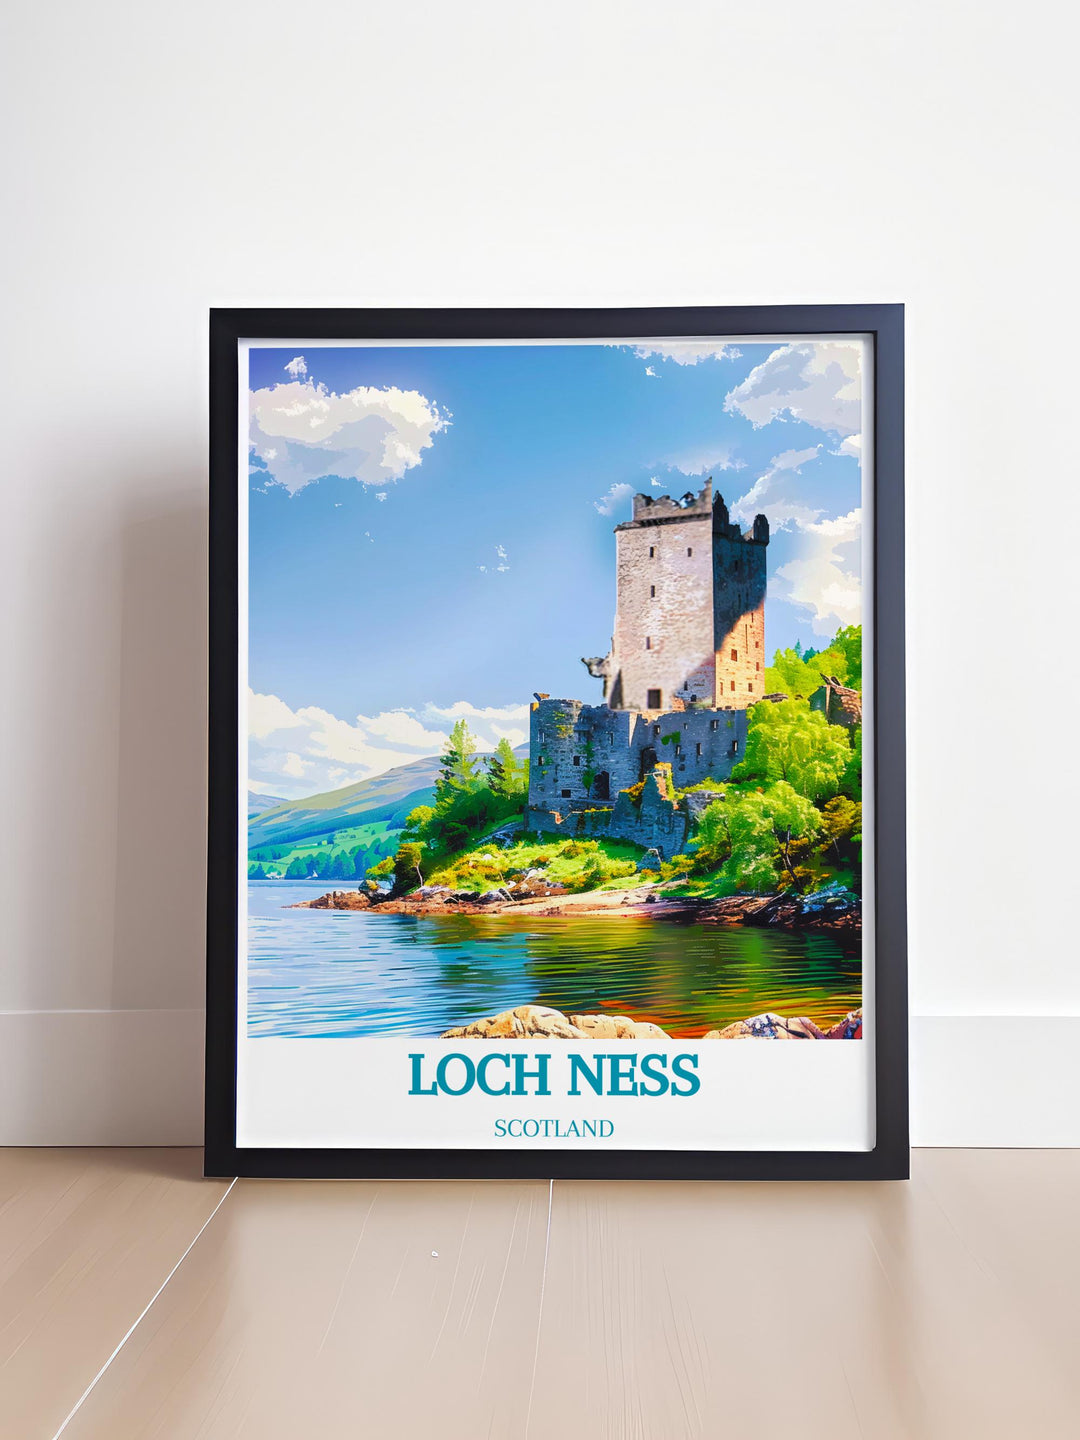 Print of Urquhart Castle, capturing detailed views of its ancient architecture against the backdrop of Loch Ness.